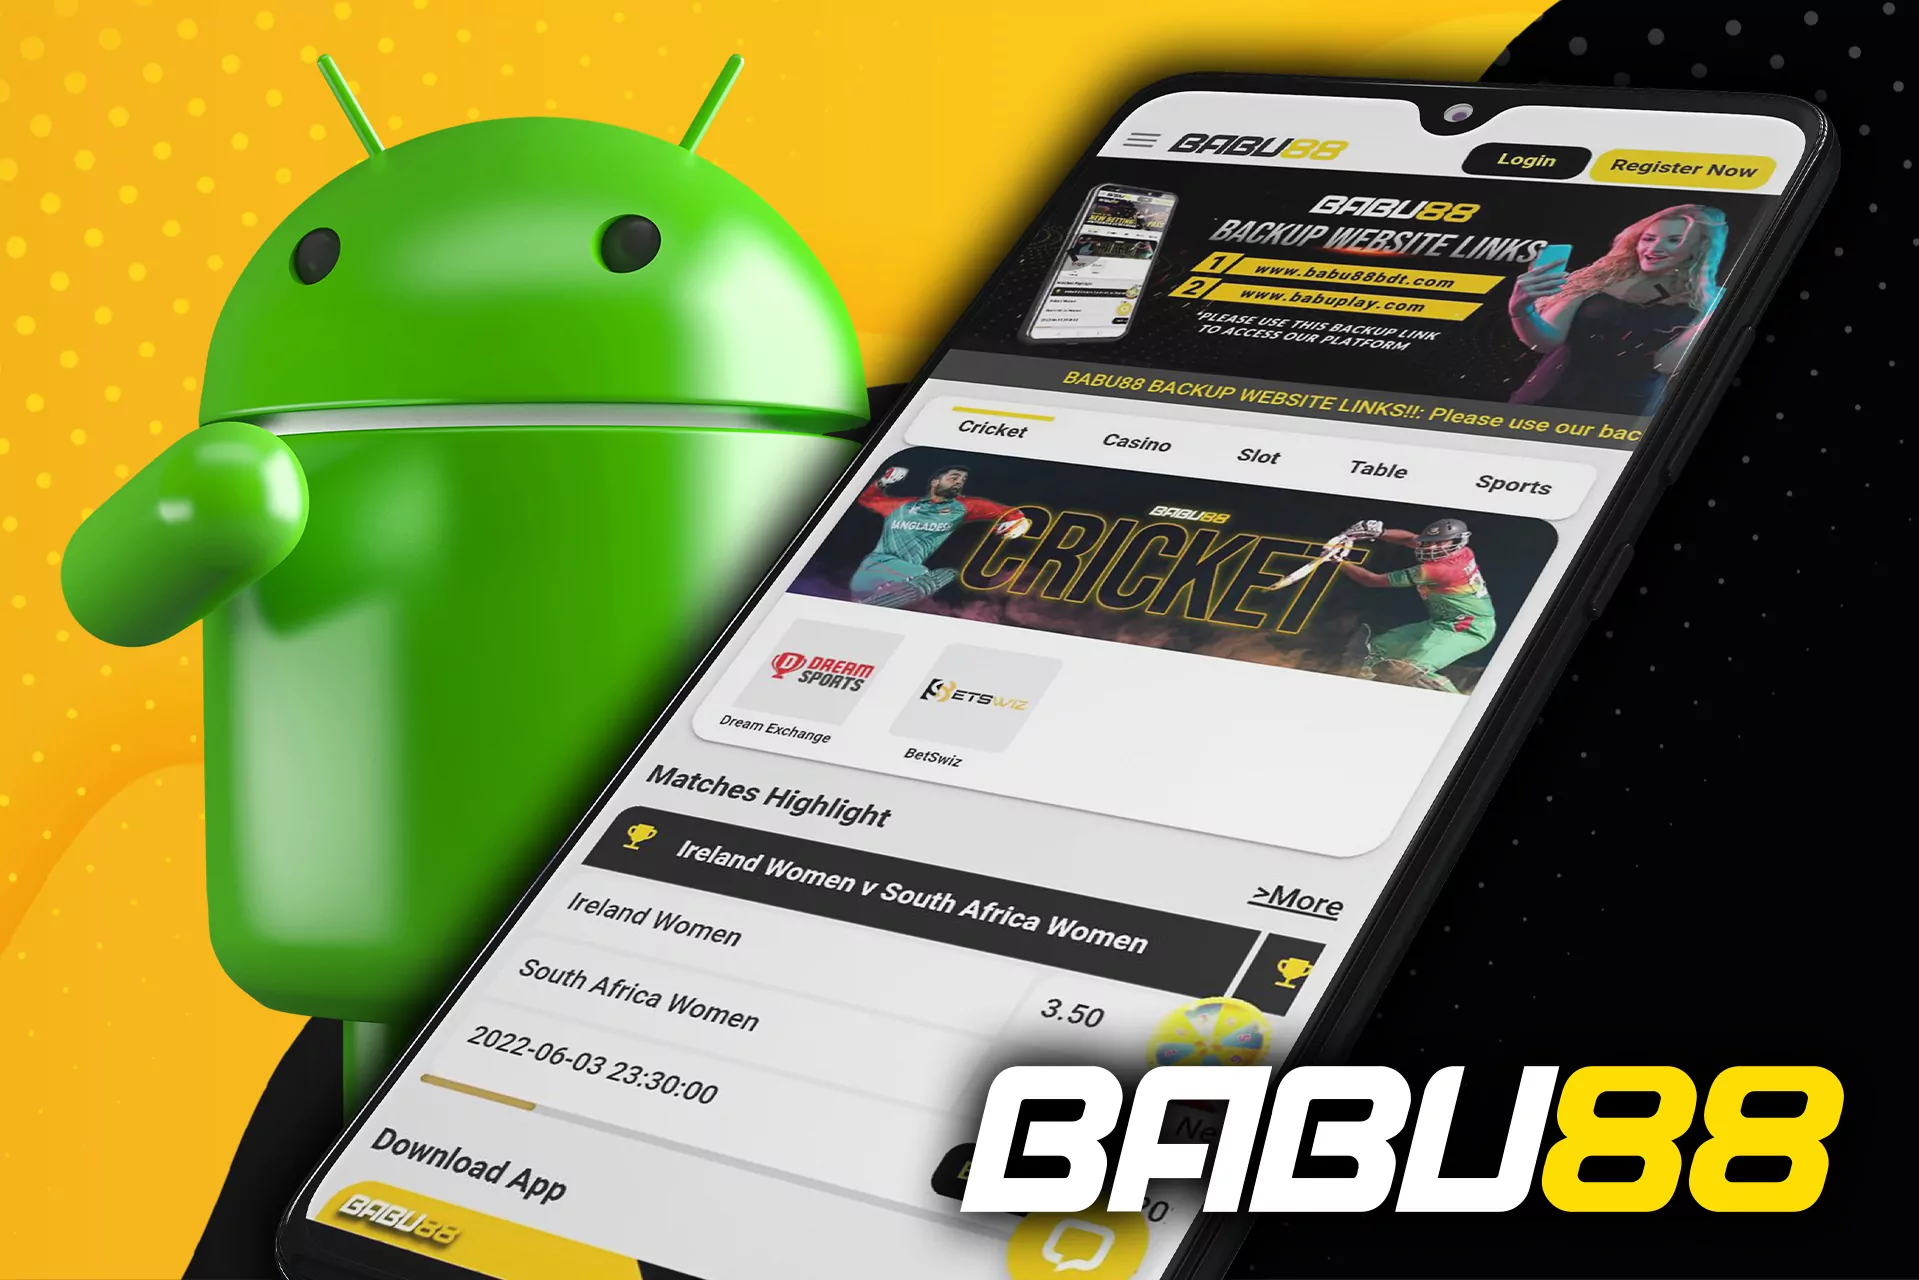 Babu88 Android app is well optimized for any devices.